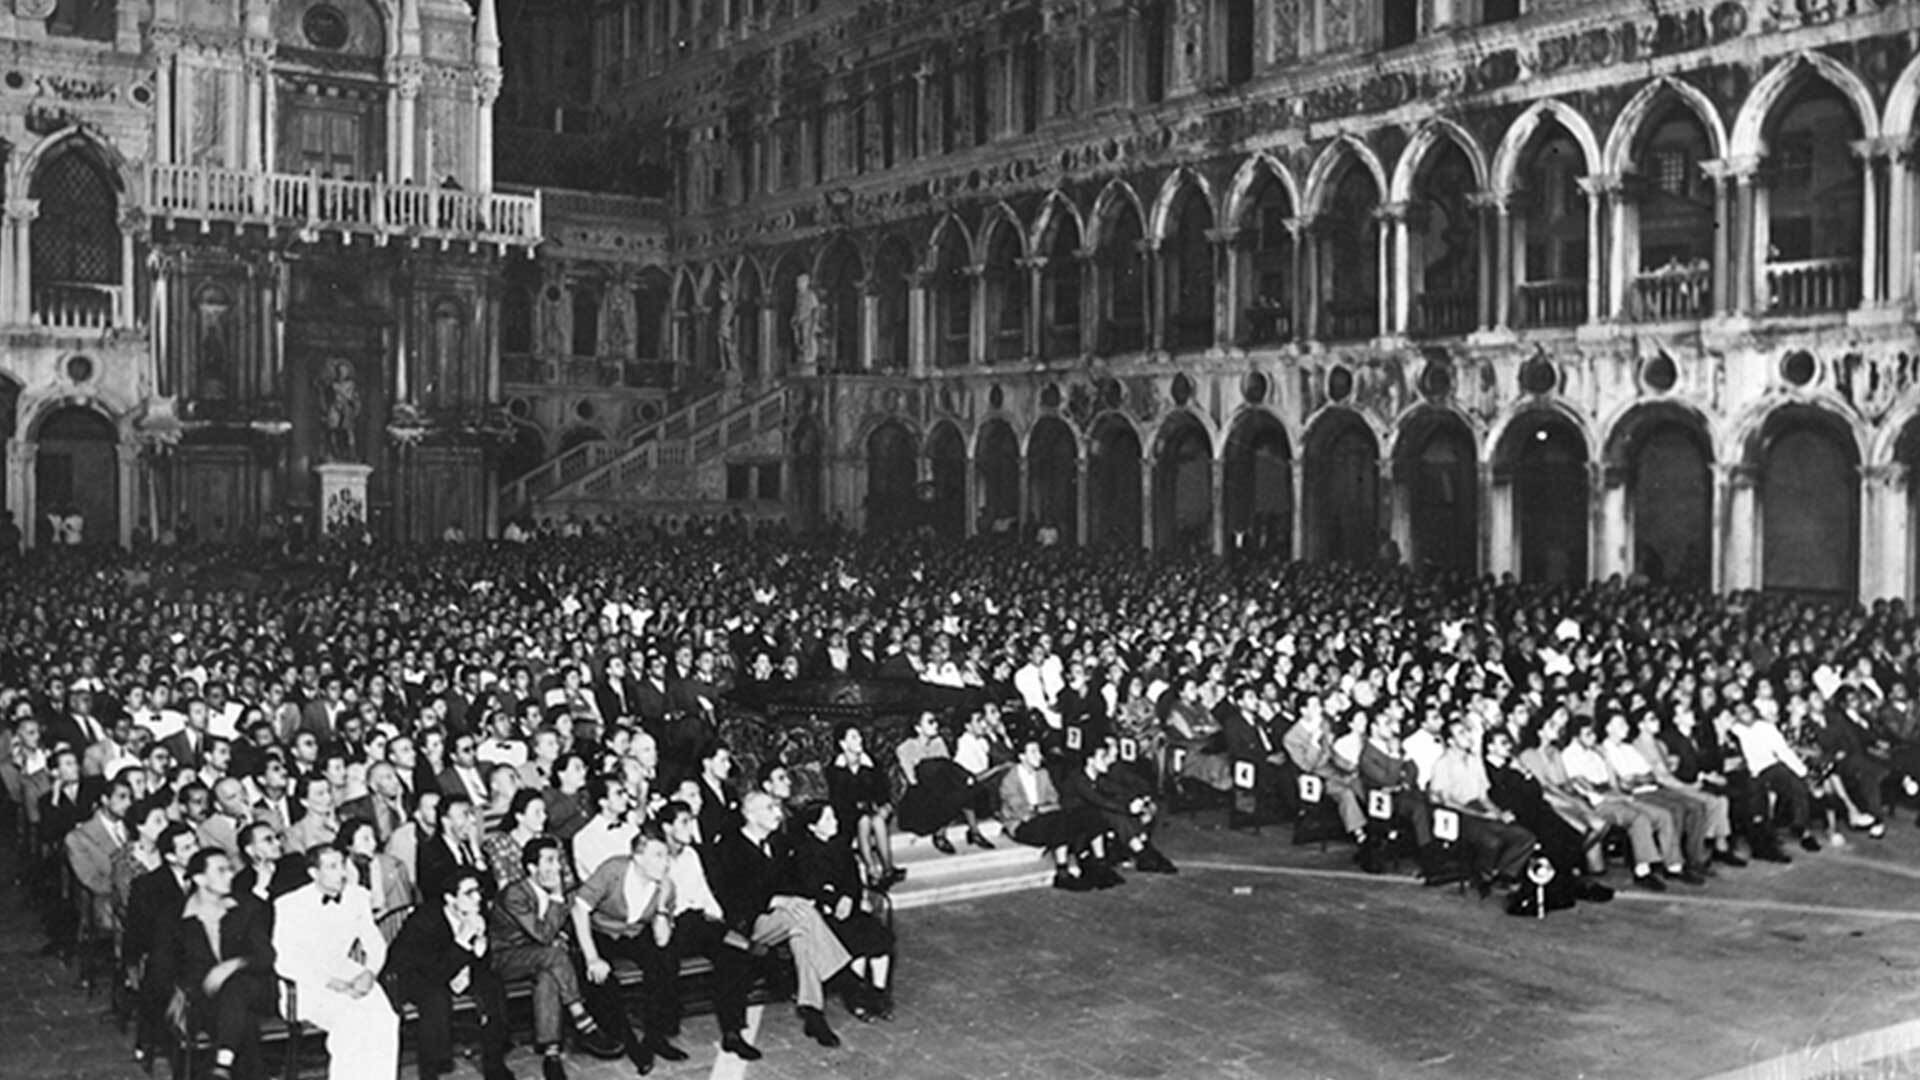 Audience in the courtyard of Palazzo Ducale, 1945 (Credit: Giacomelli)